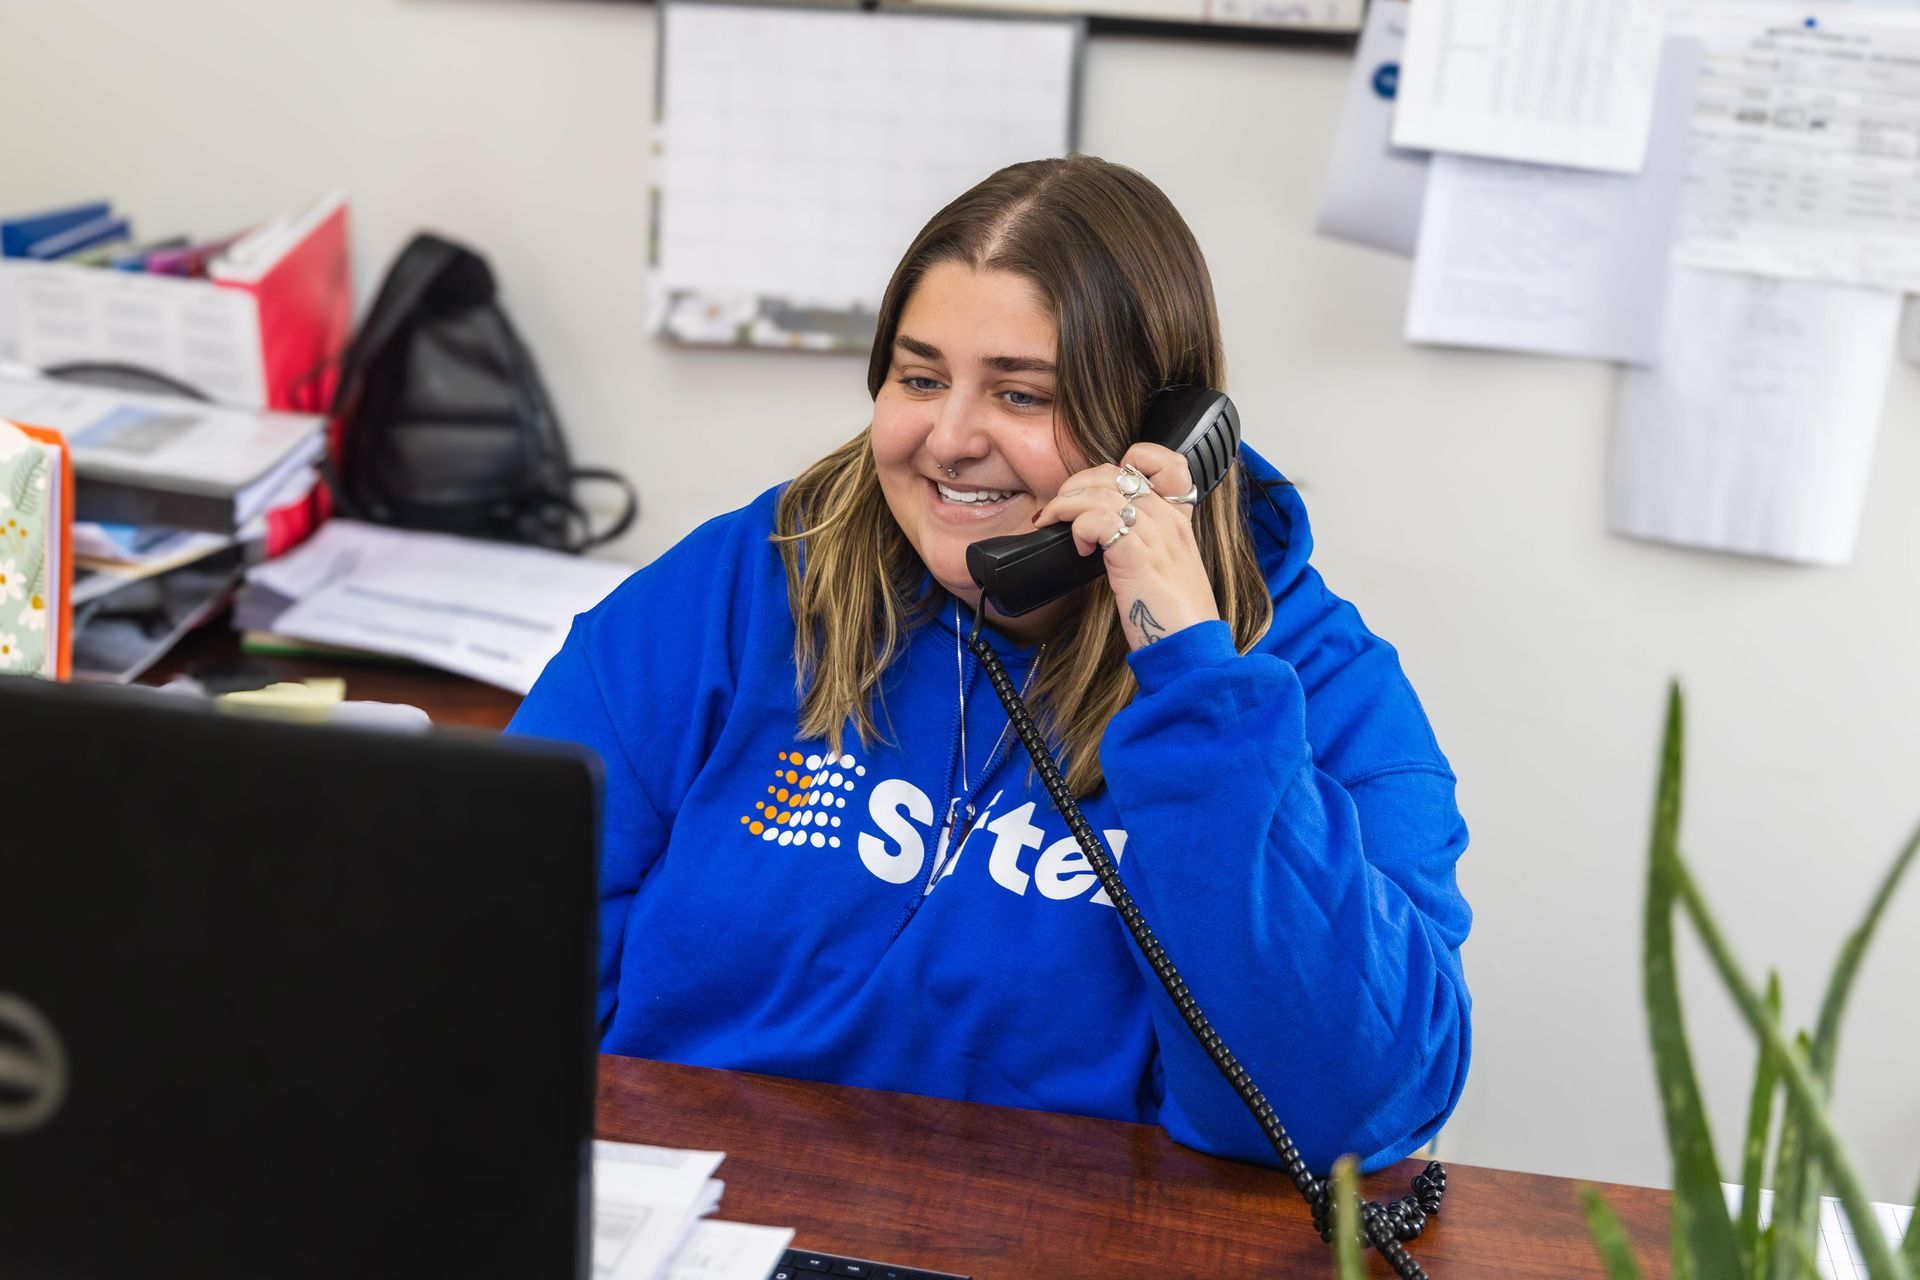 A Siftex employee smiling while talking on the phone